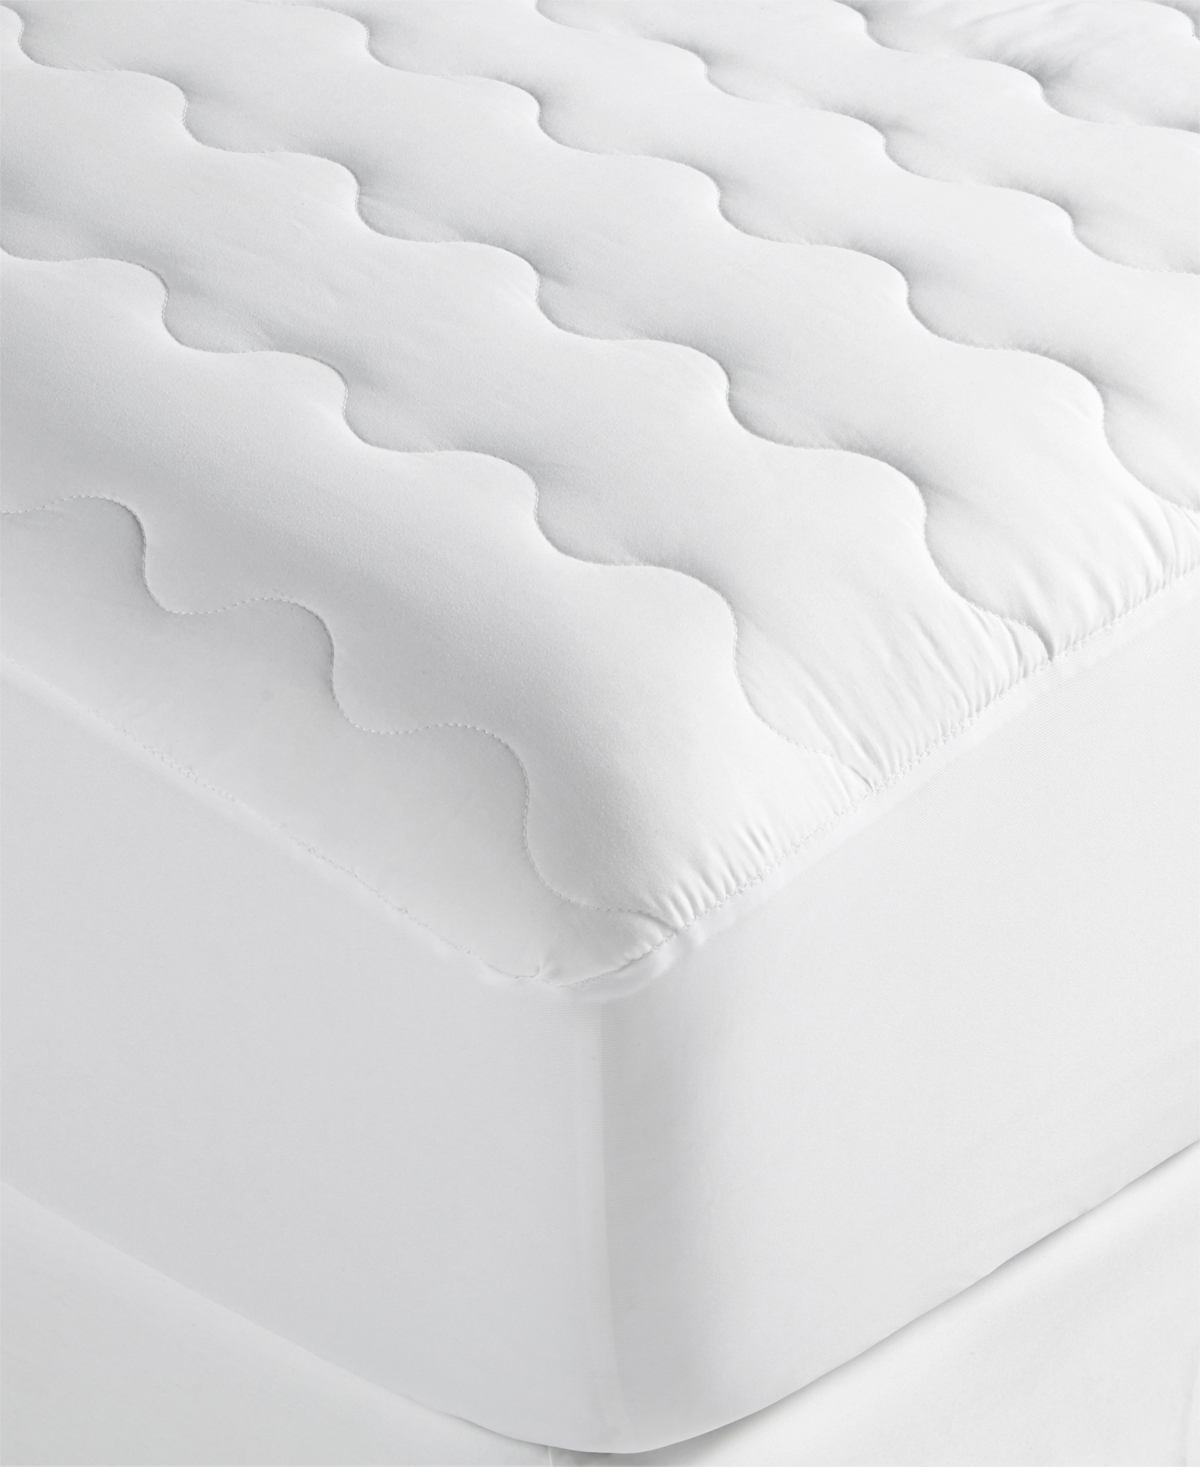 Shop Home Design Easy Care Waterproof Mattress Pads, King, Created For Macy's In White